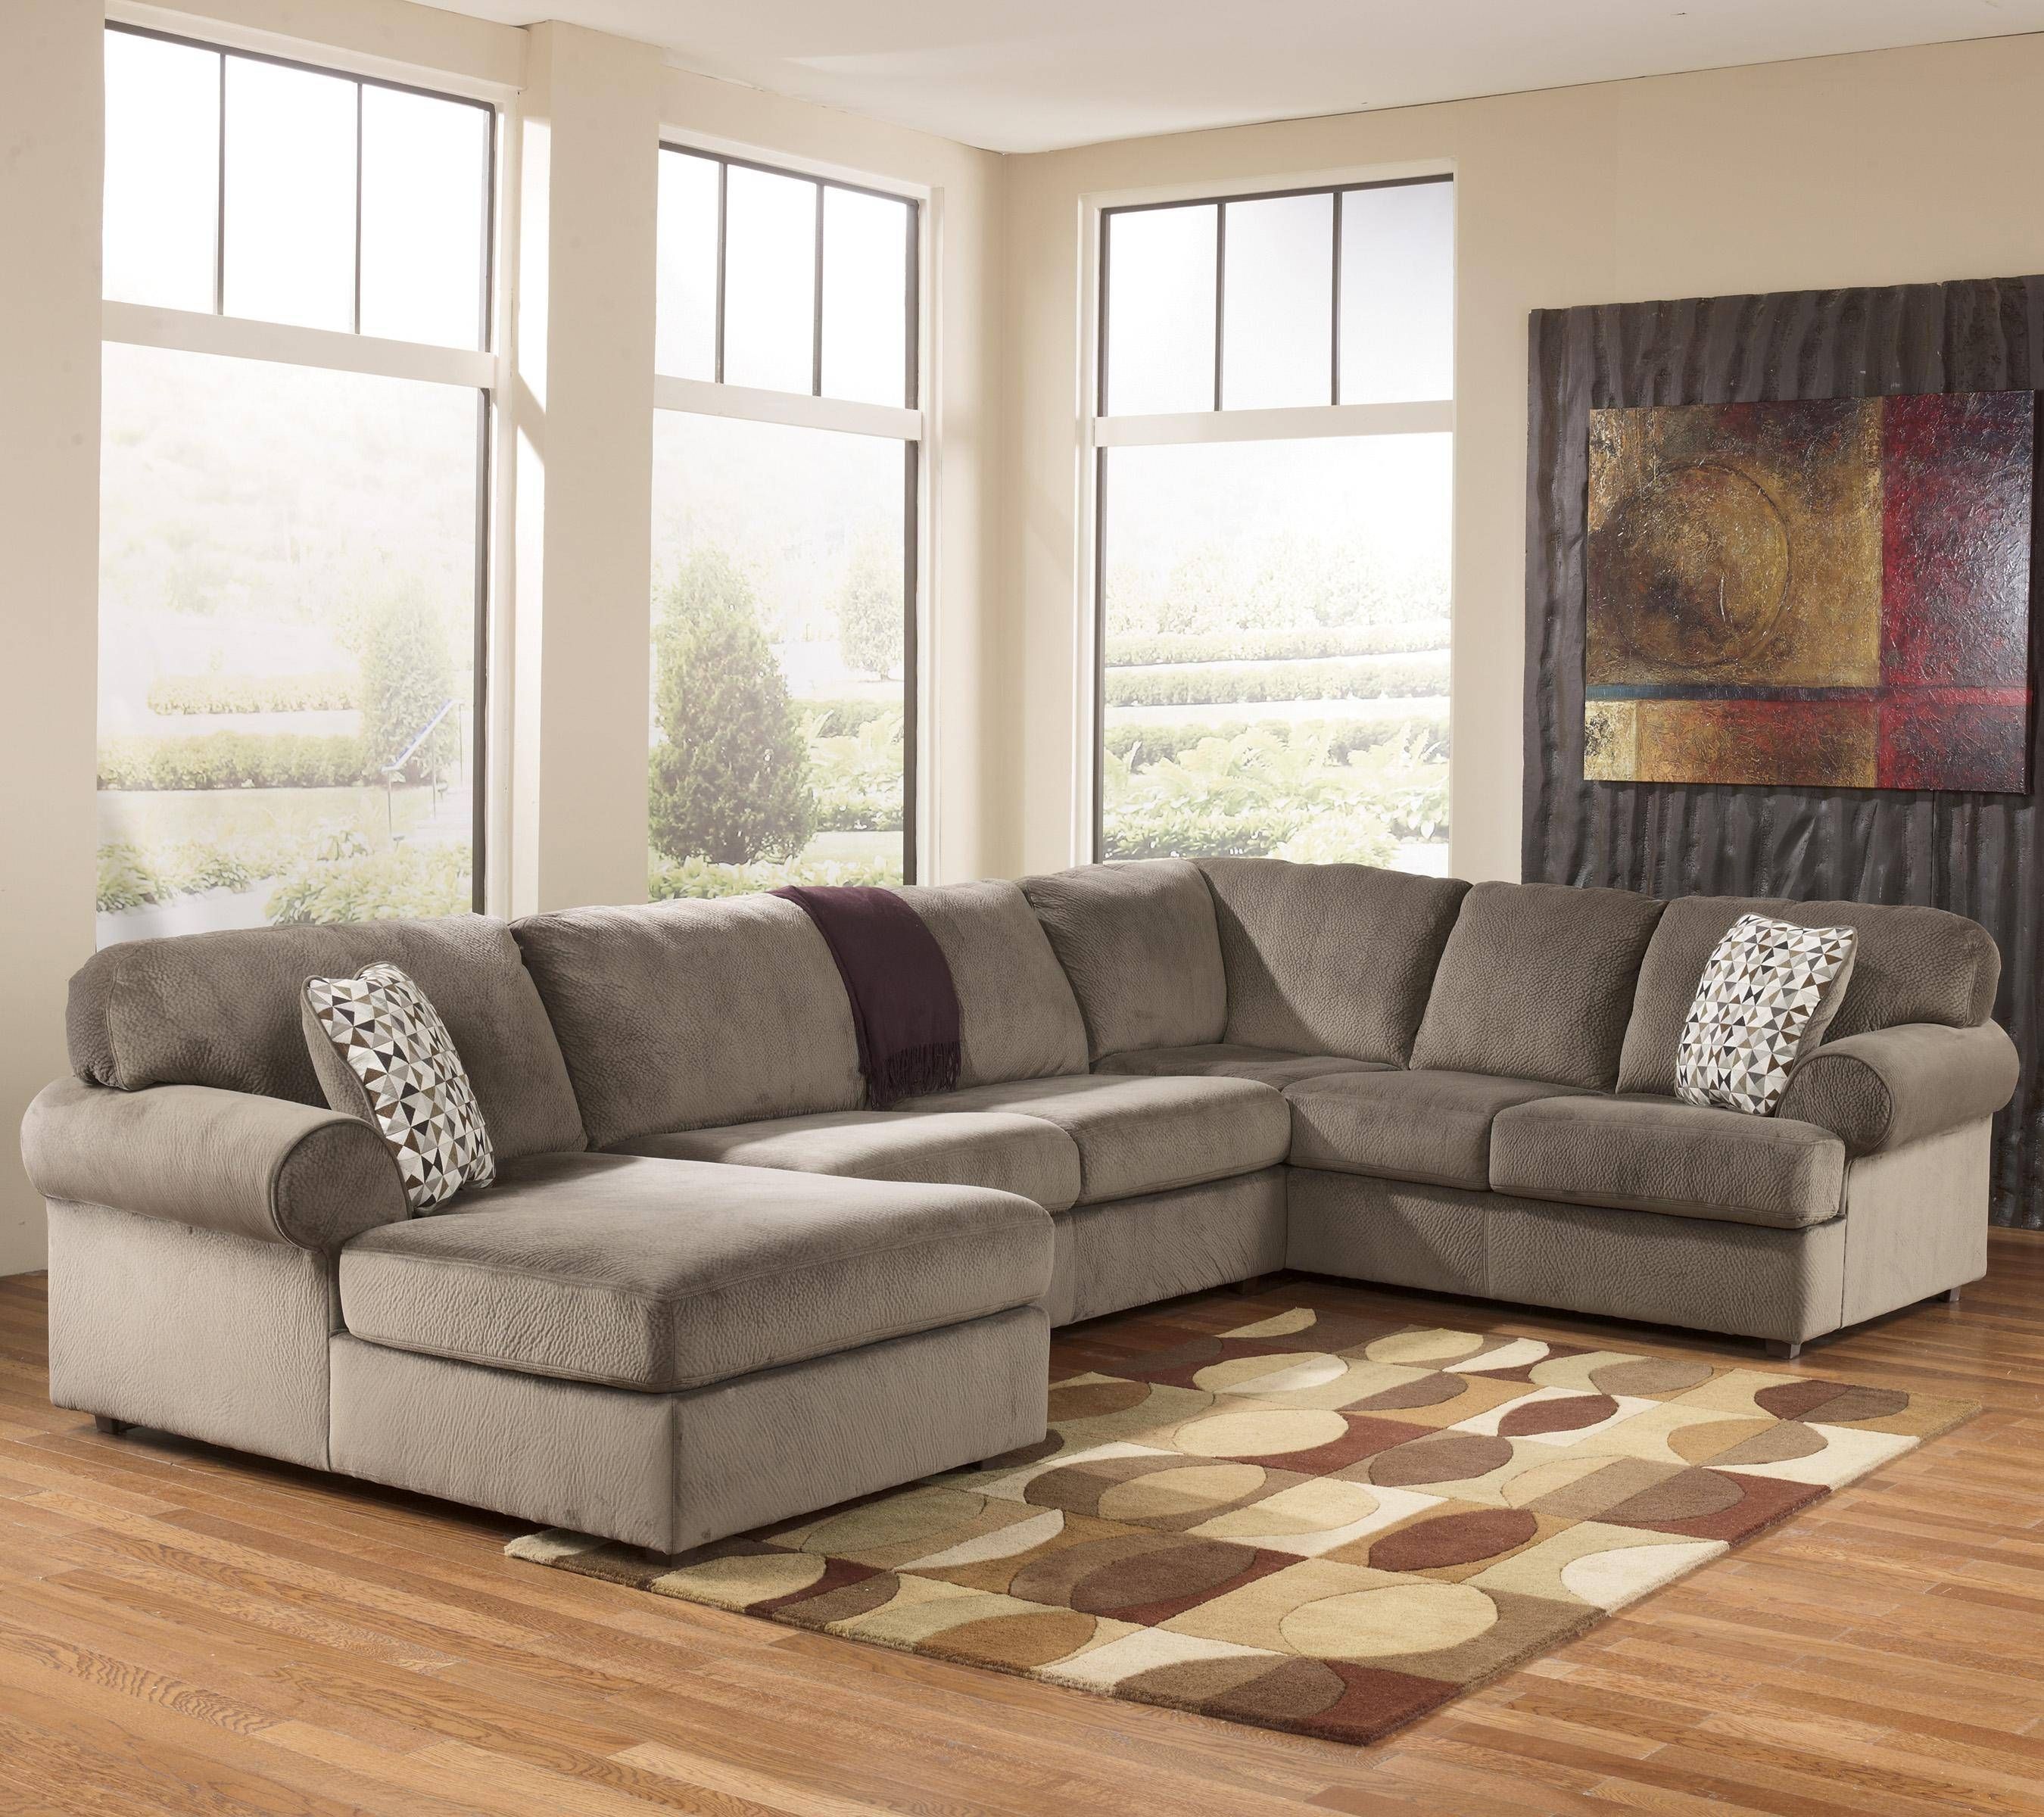 Chair Sofa Sectional Sofas At Ashley Furniture Ashley Regarding Sectional Sofas Ashley Furniture 